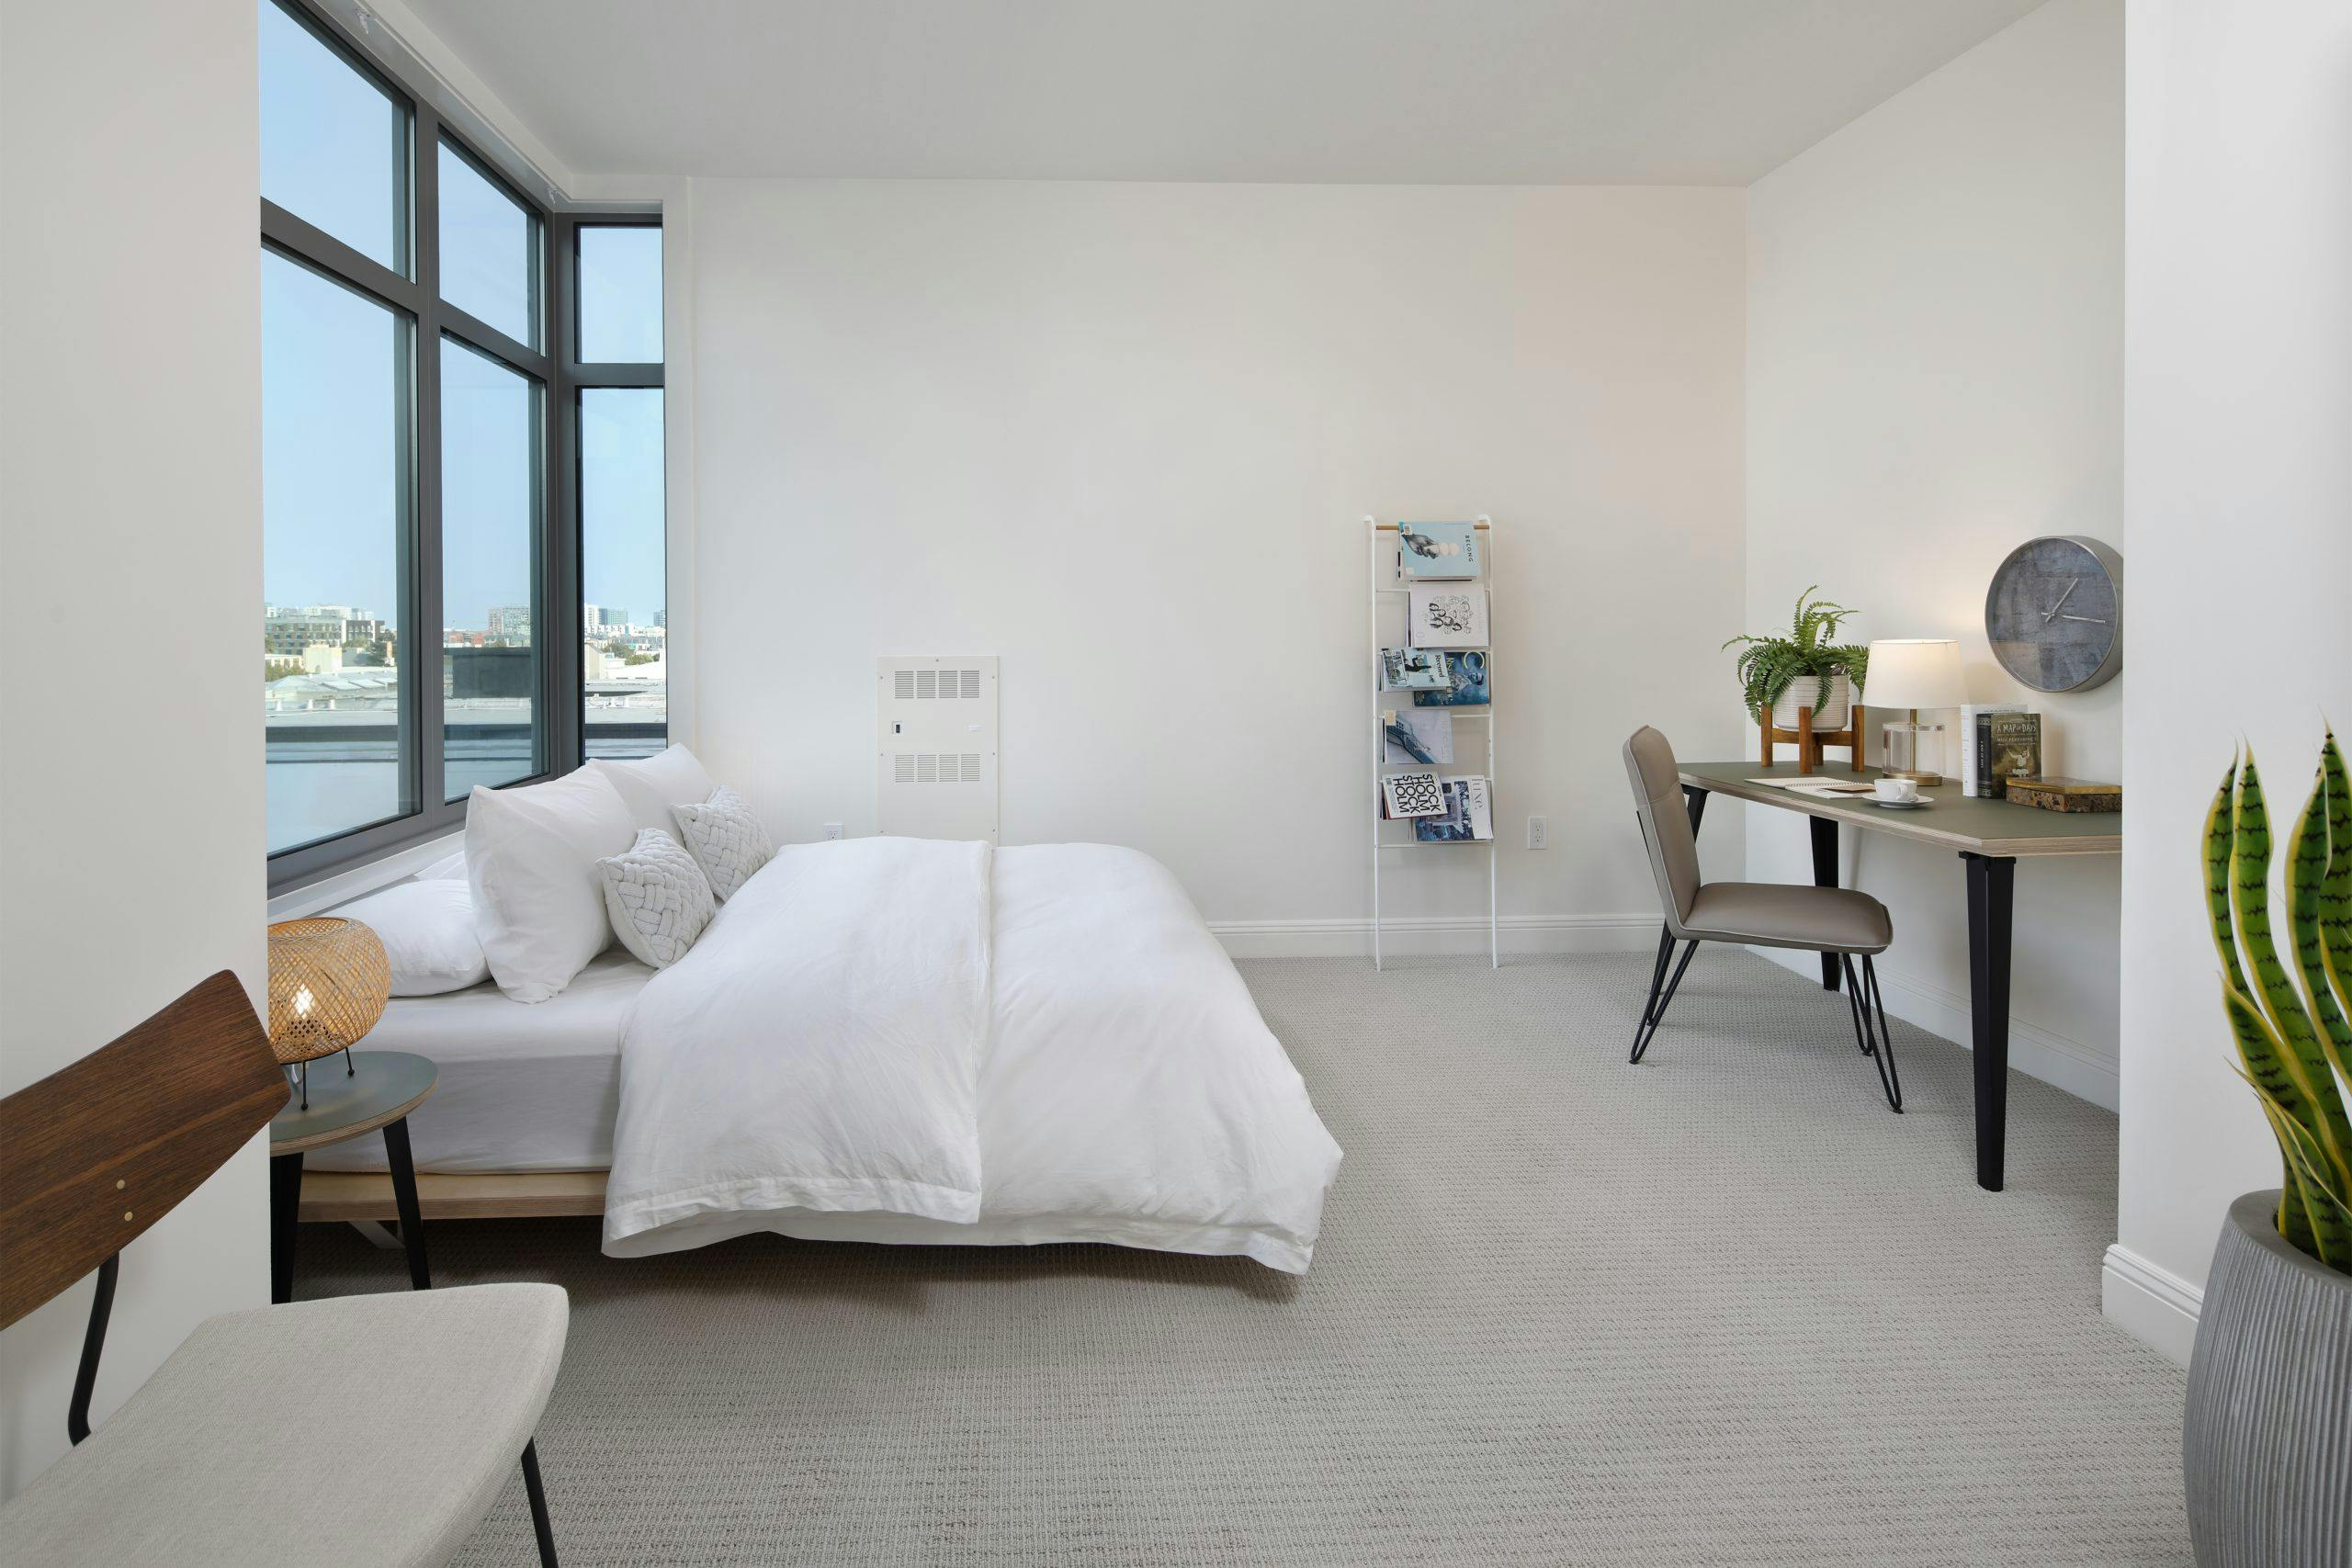 In contrast with the living rooms, the bedrooms in the OneEleven SF are adorned with soft carpet. They are spacious and well designed, allowing for a pleasant resident experience.